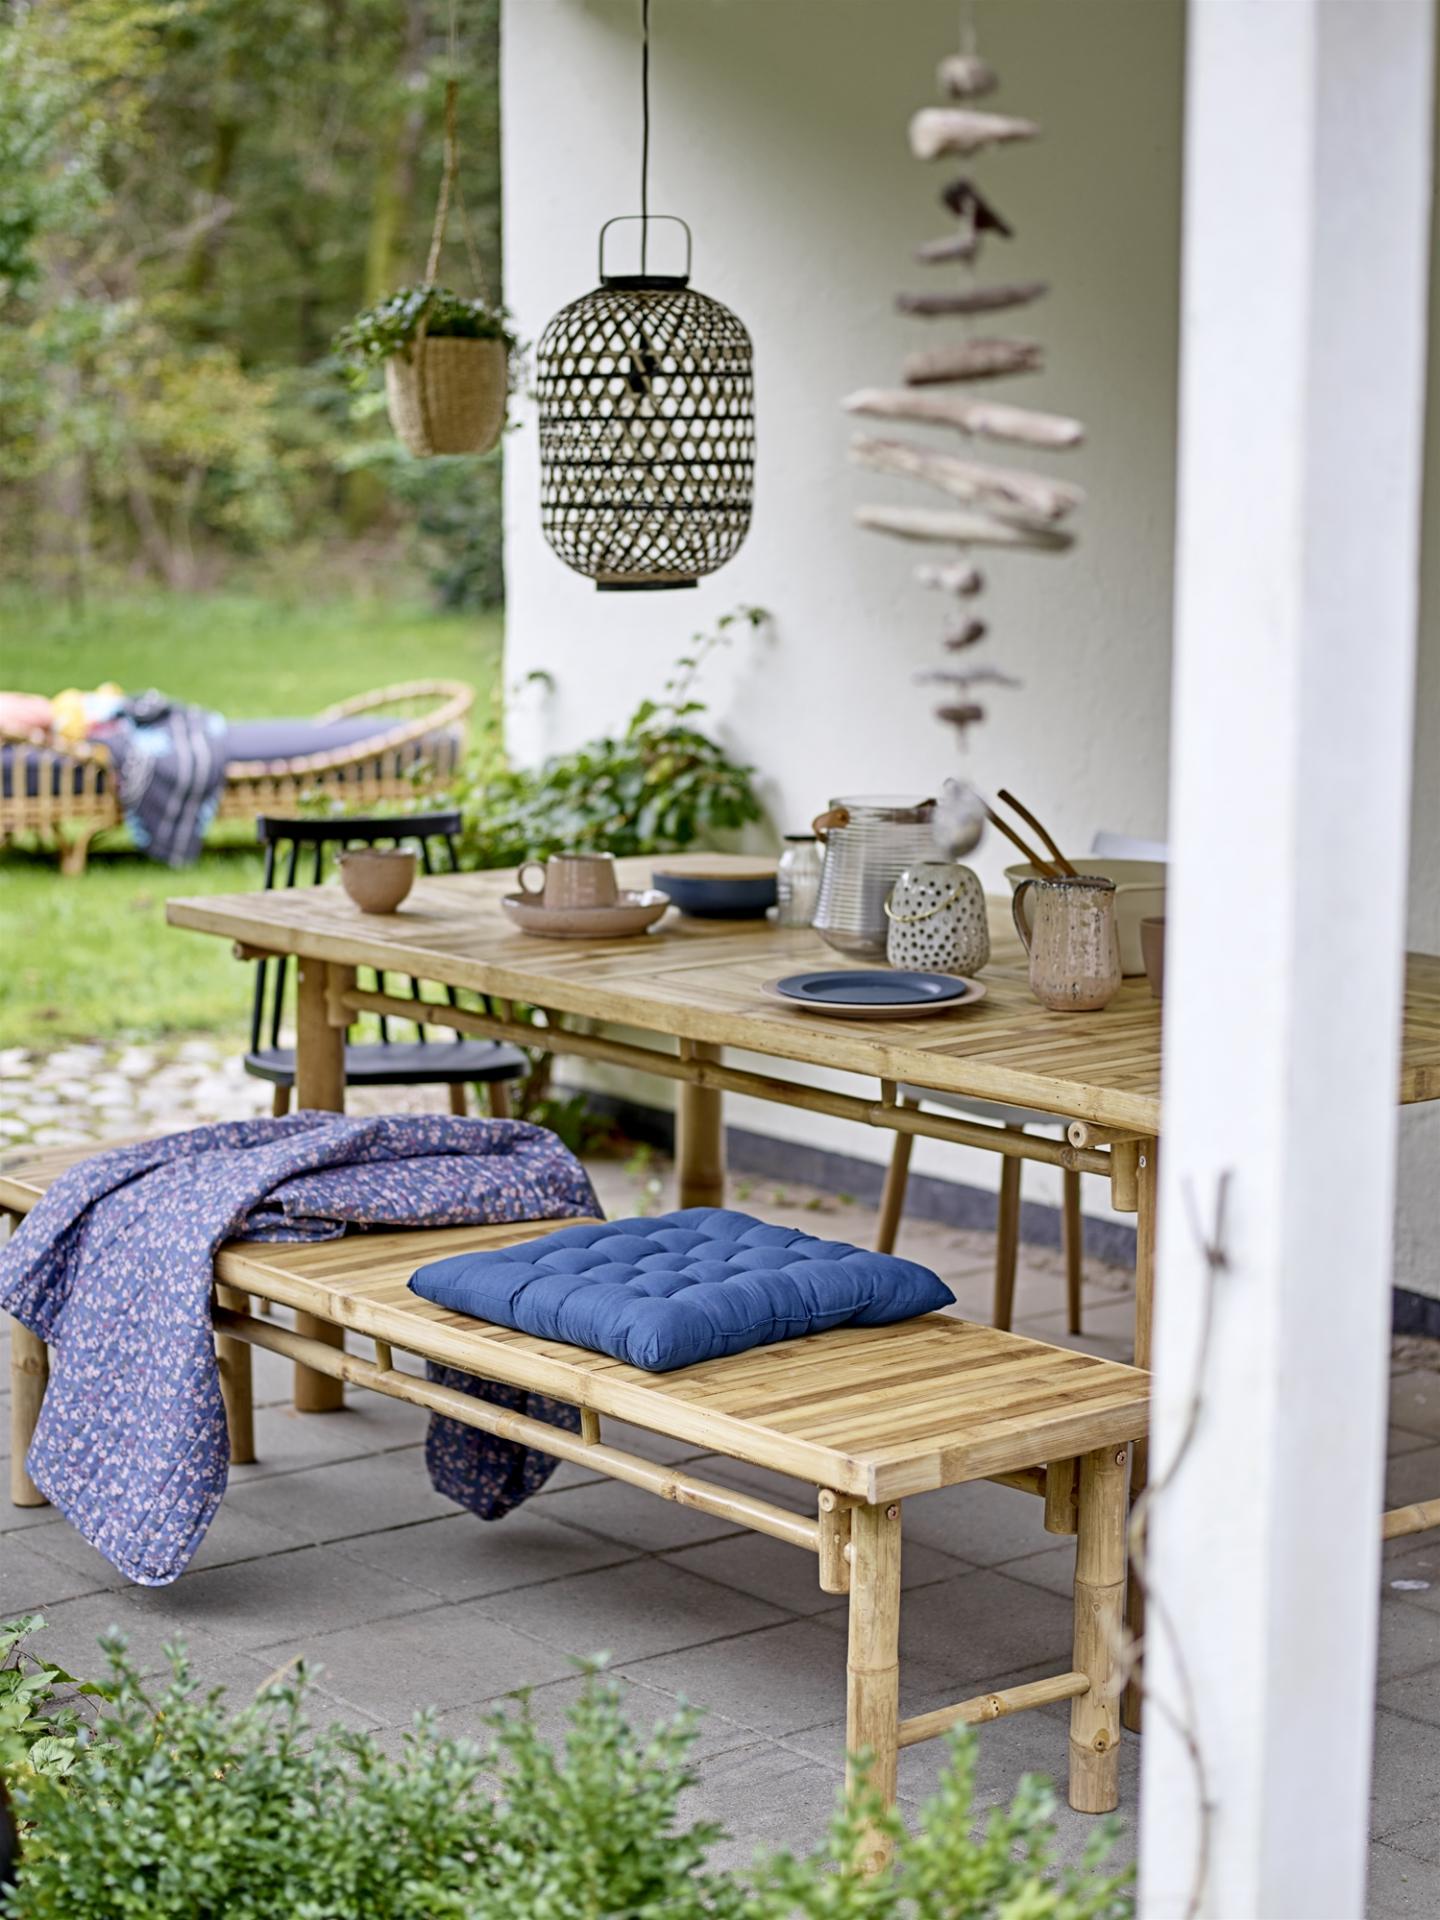 3 Best Patio Furnishings to Add Comfort to Your Outdoor Space